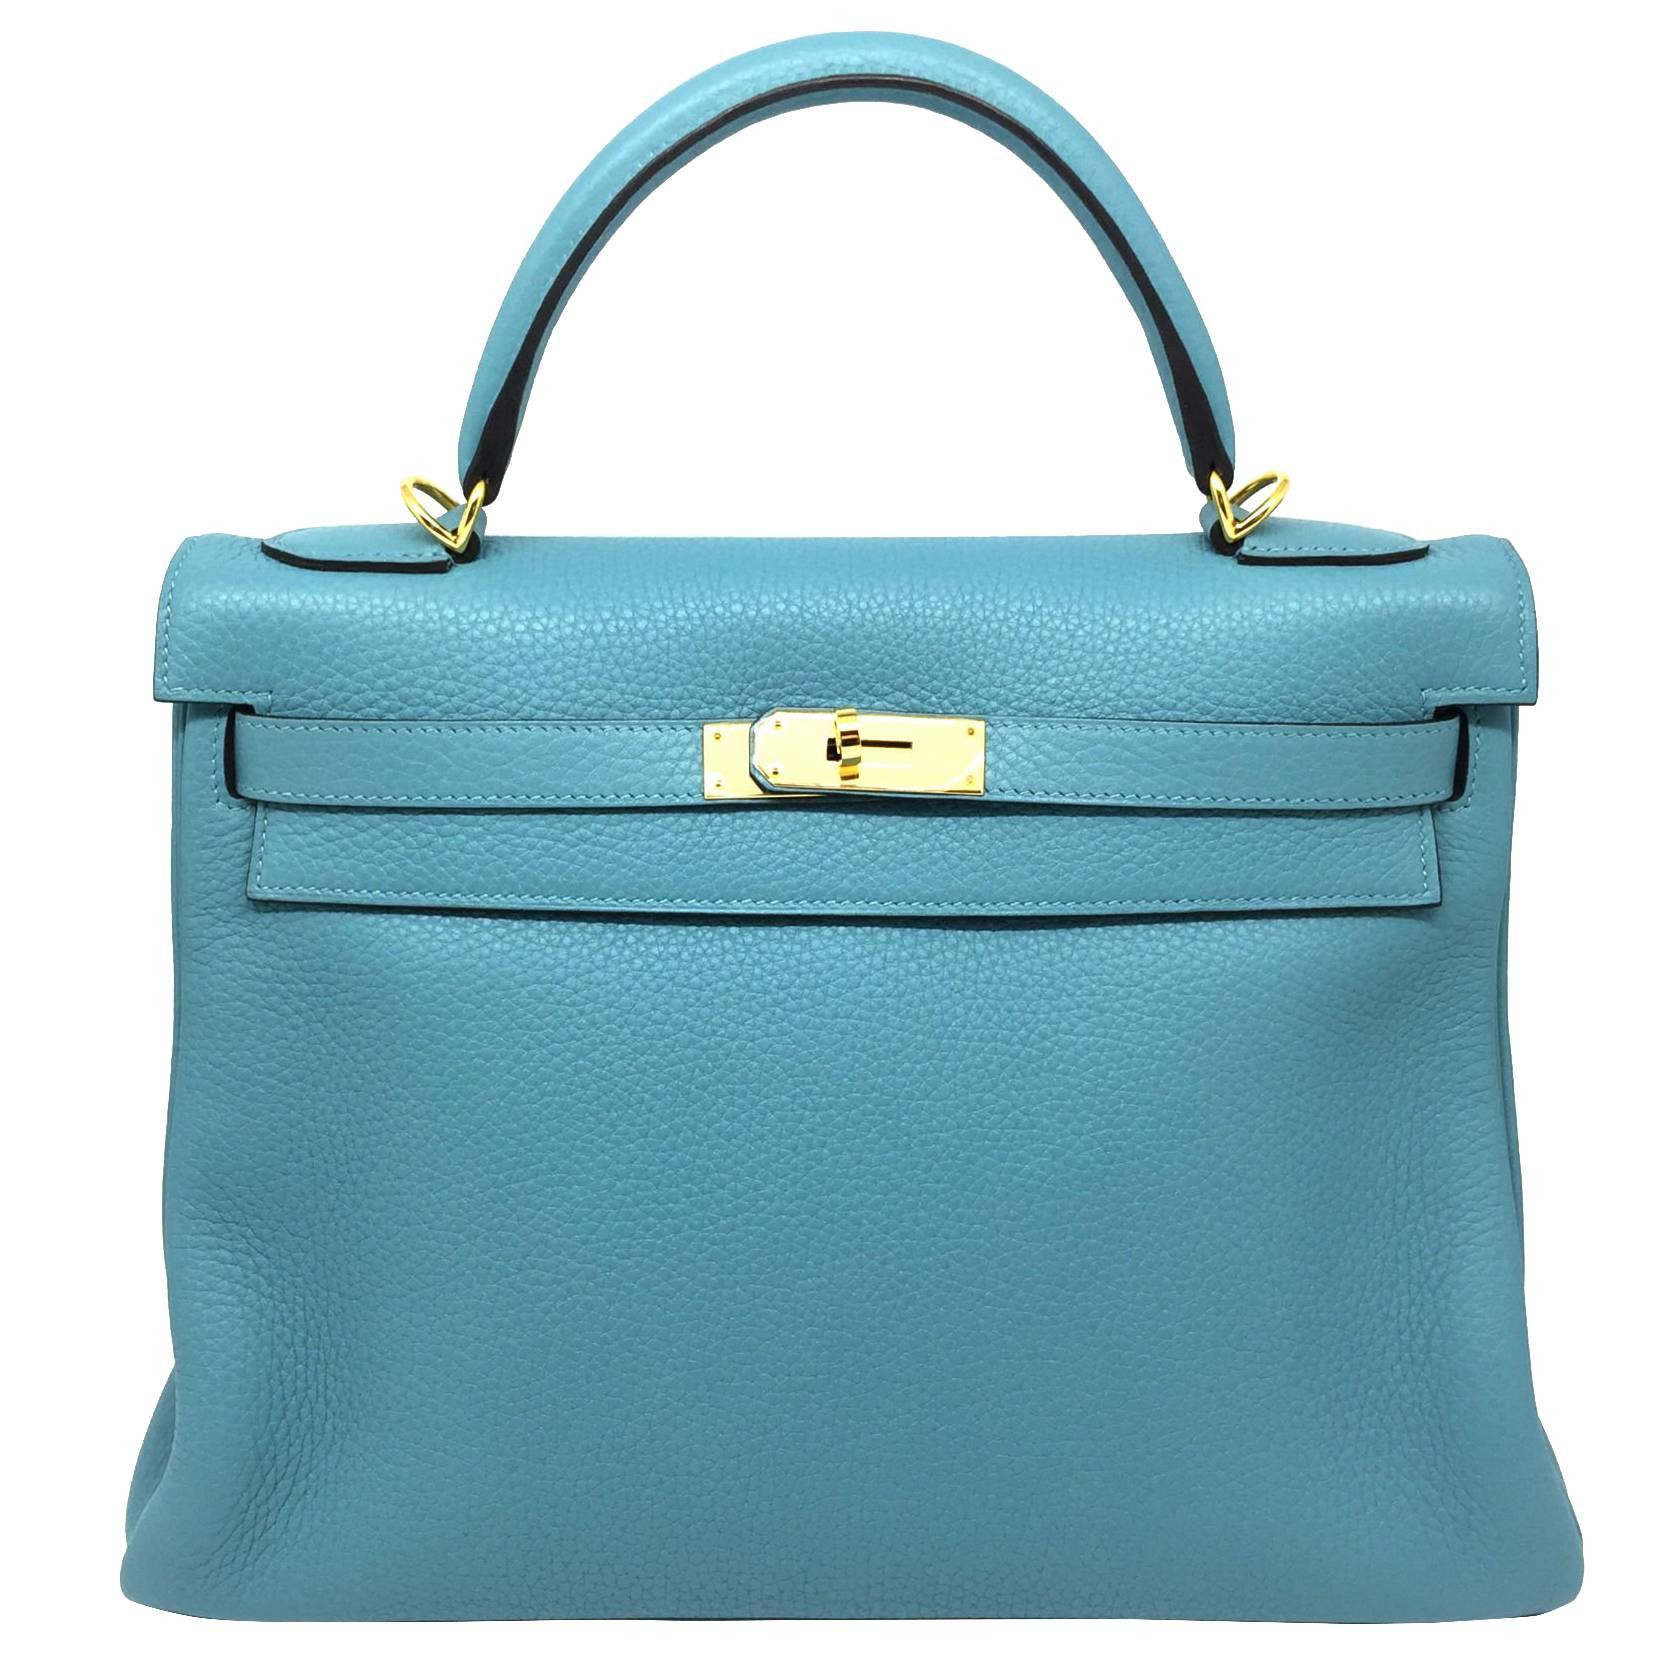 Hermes Kelly 32 Blue Saint Cyr Taurillon Clemence Leather GHW Top Handle Bag For Sale